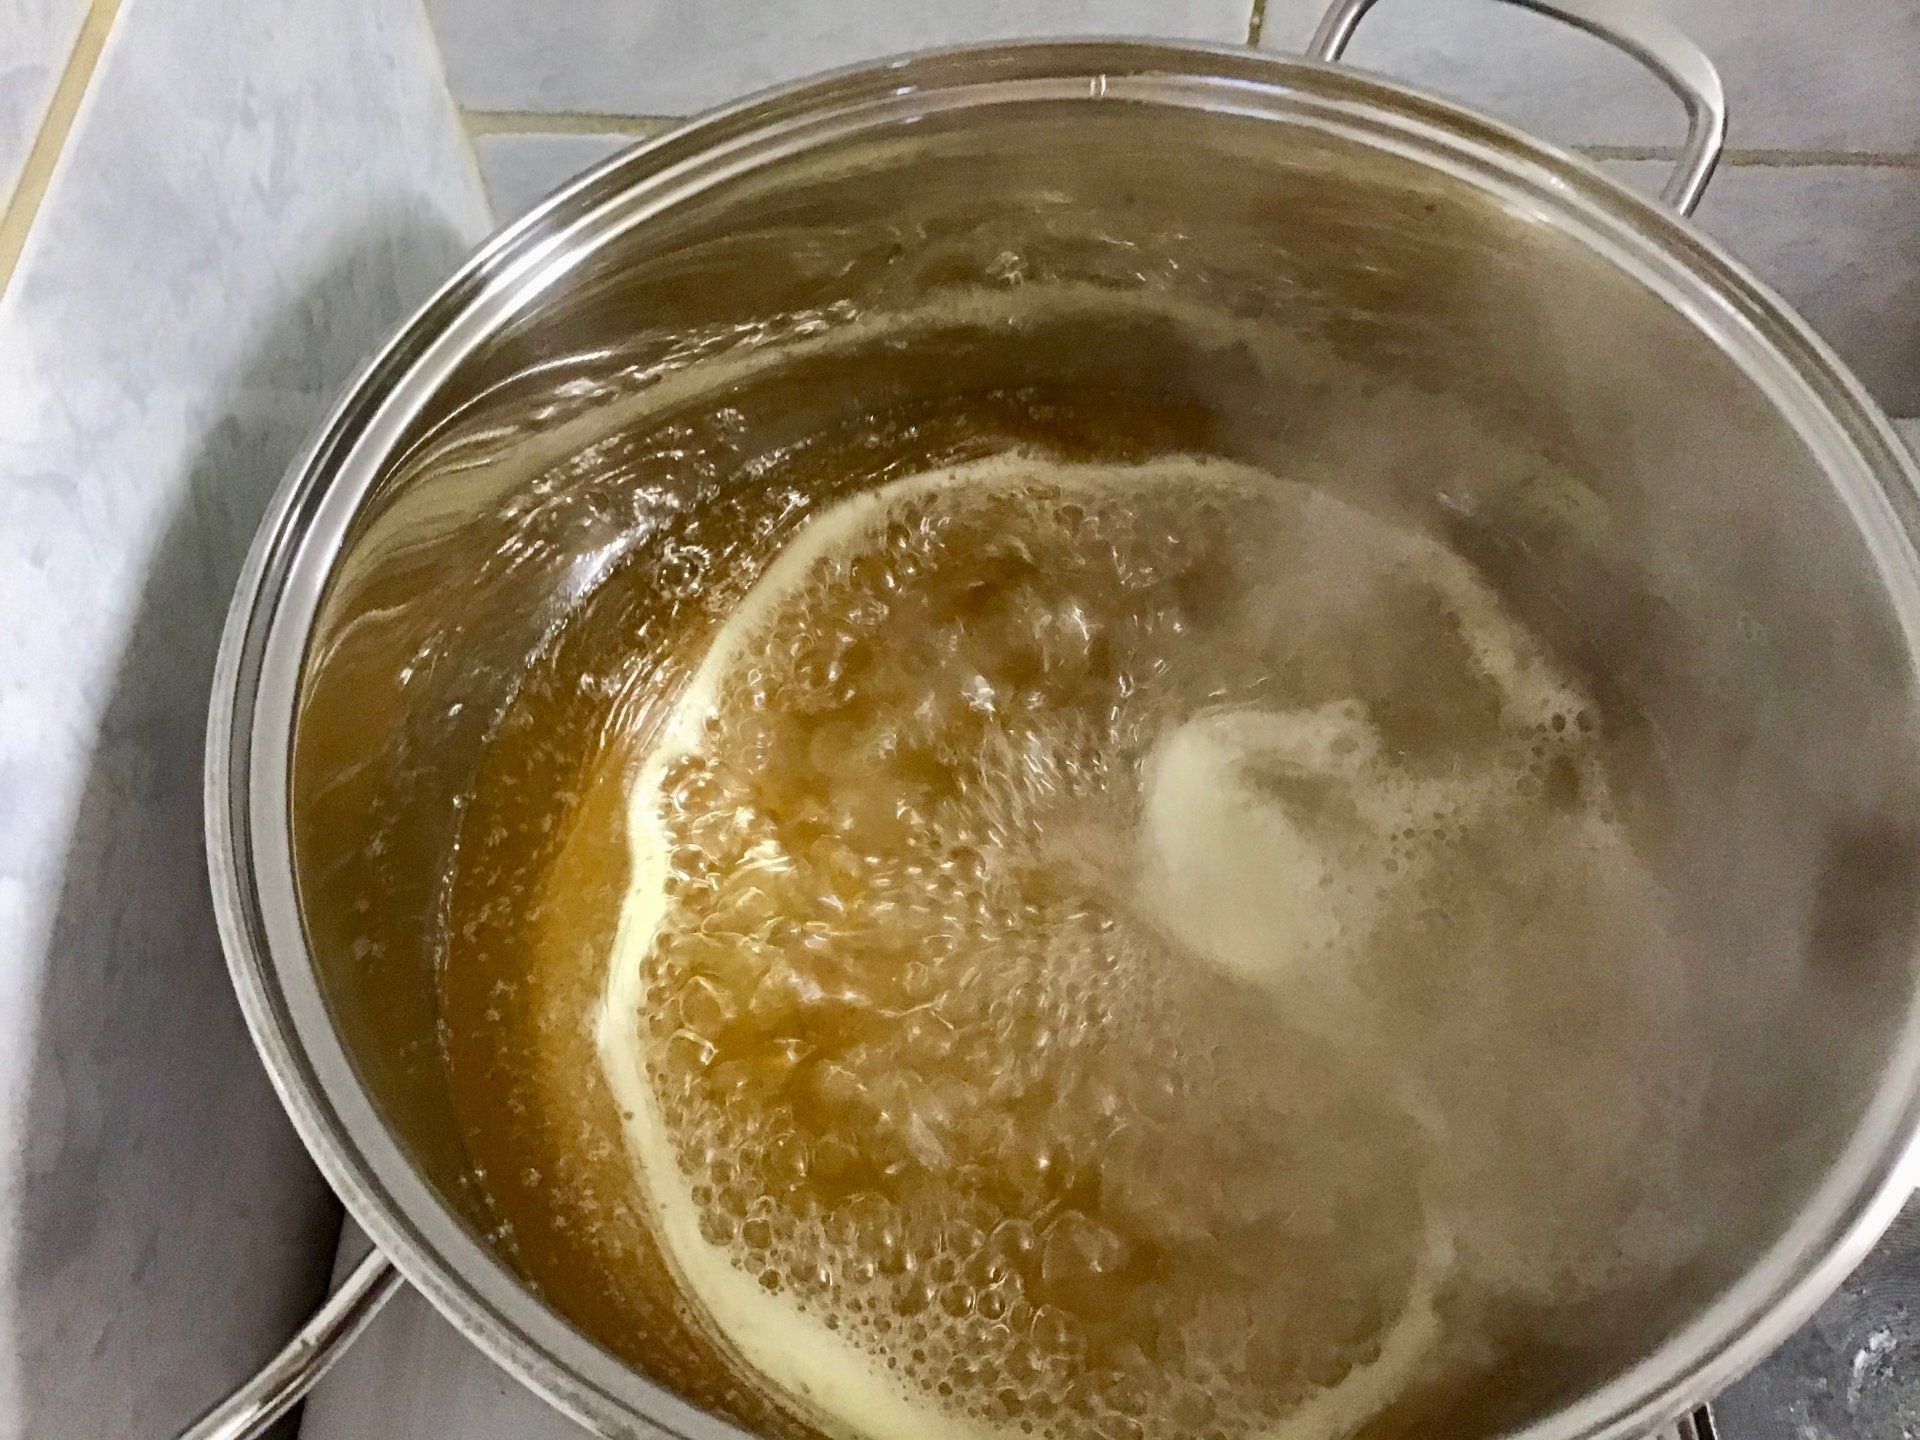 When the syrup reaches boiling point, start timing - making marmalade on Hydra Island Greece.